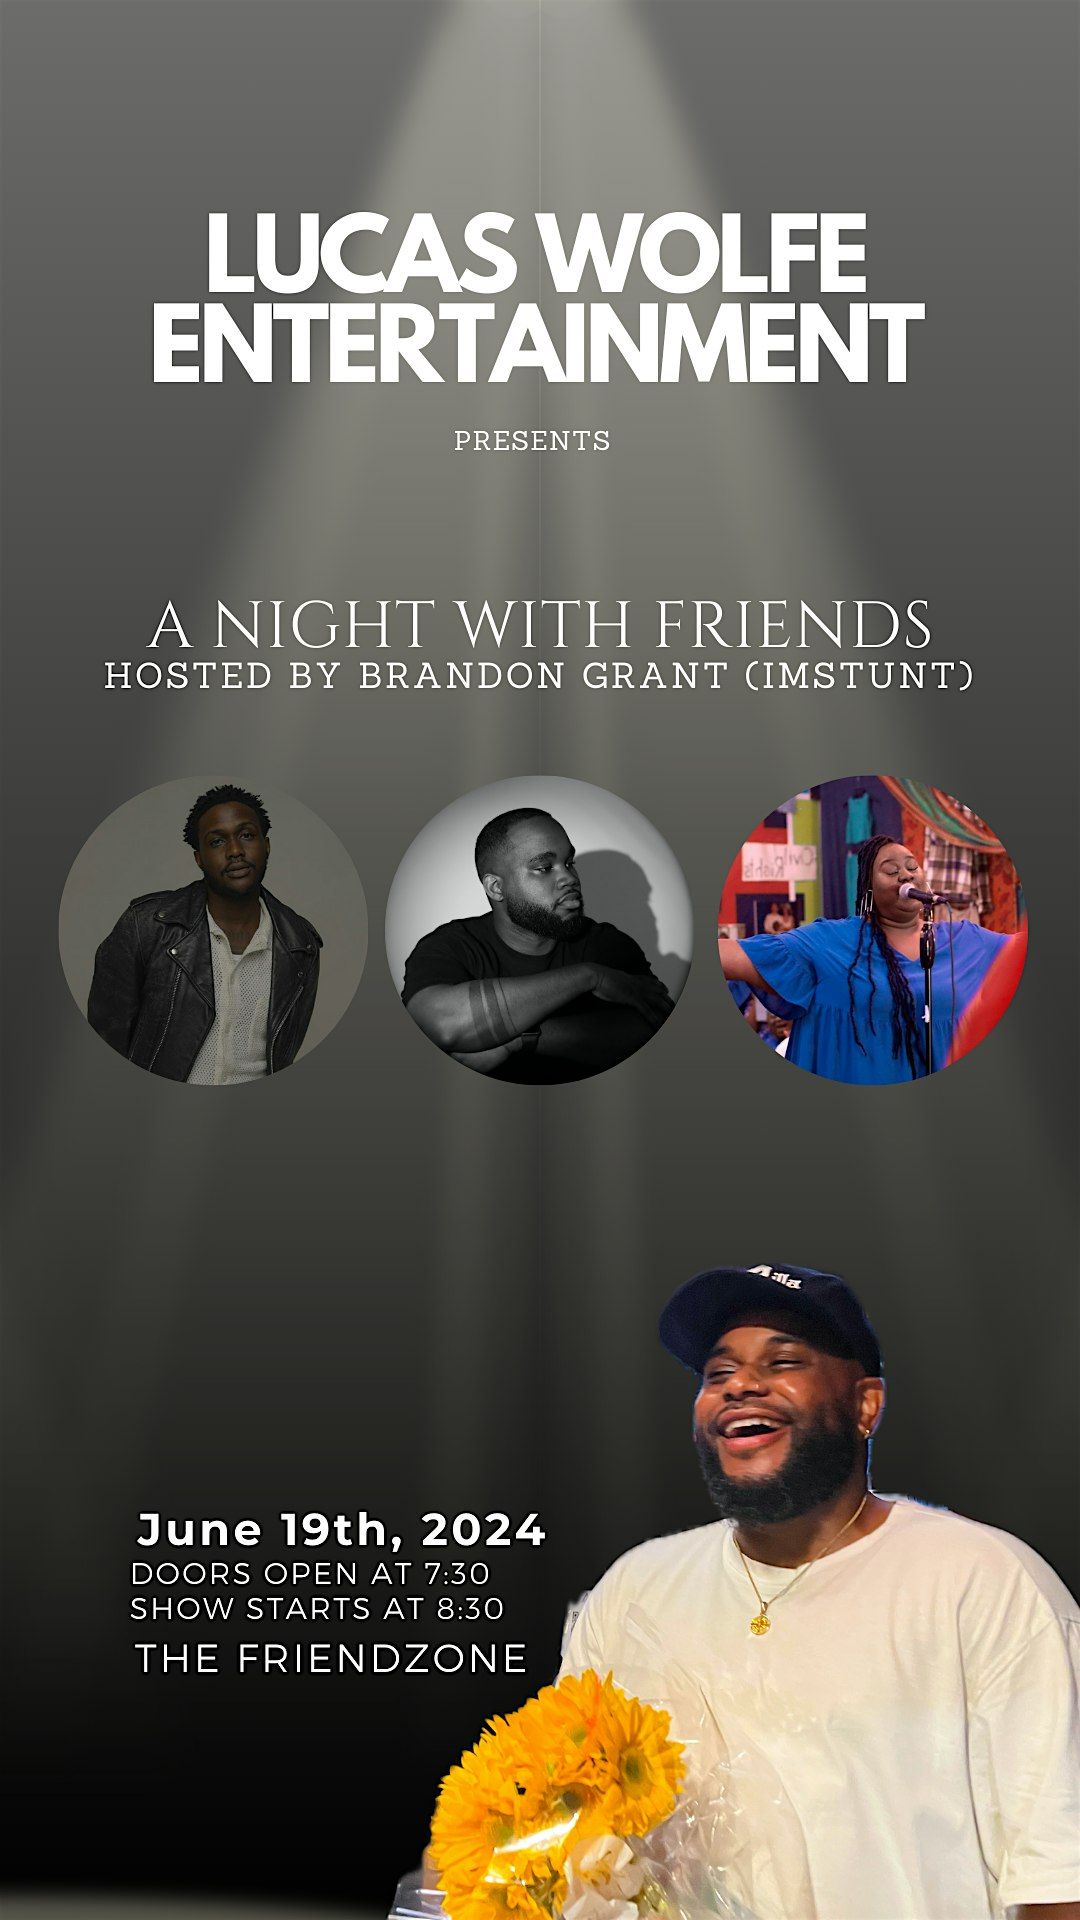 Lucas Wolfe Entertainment Presents: A Night With Friends.